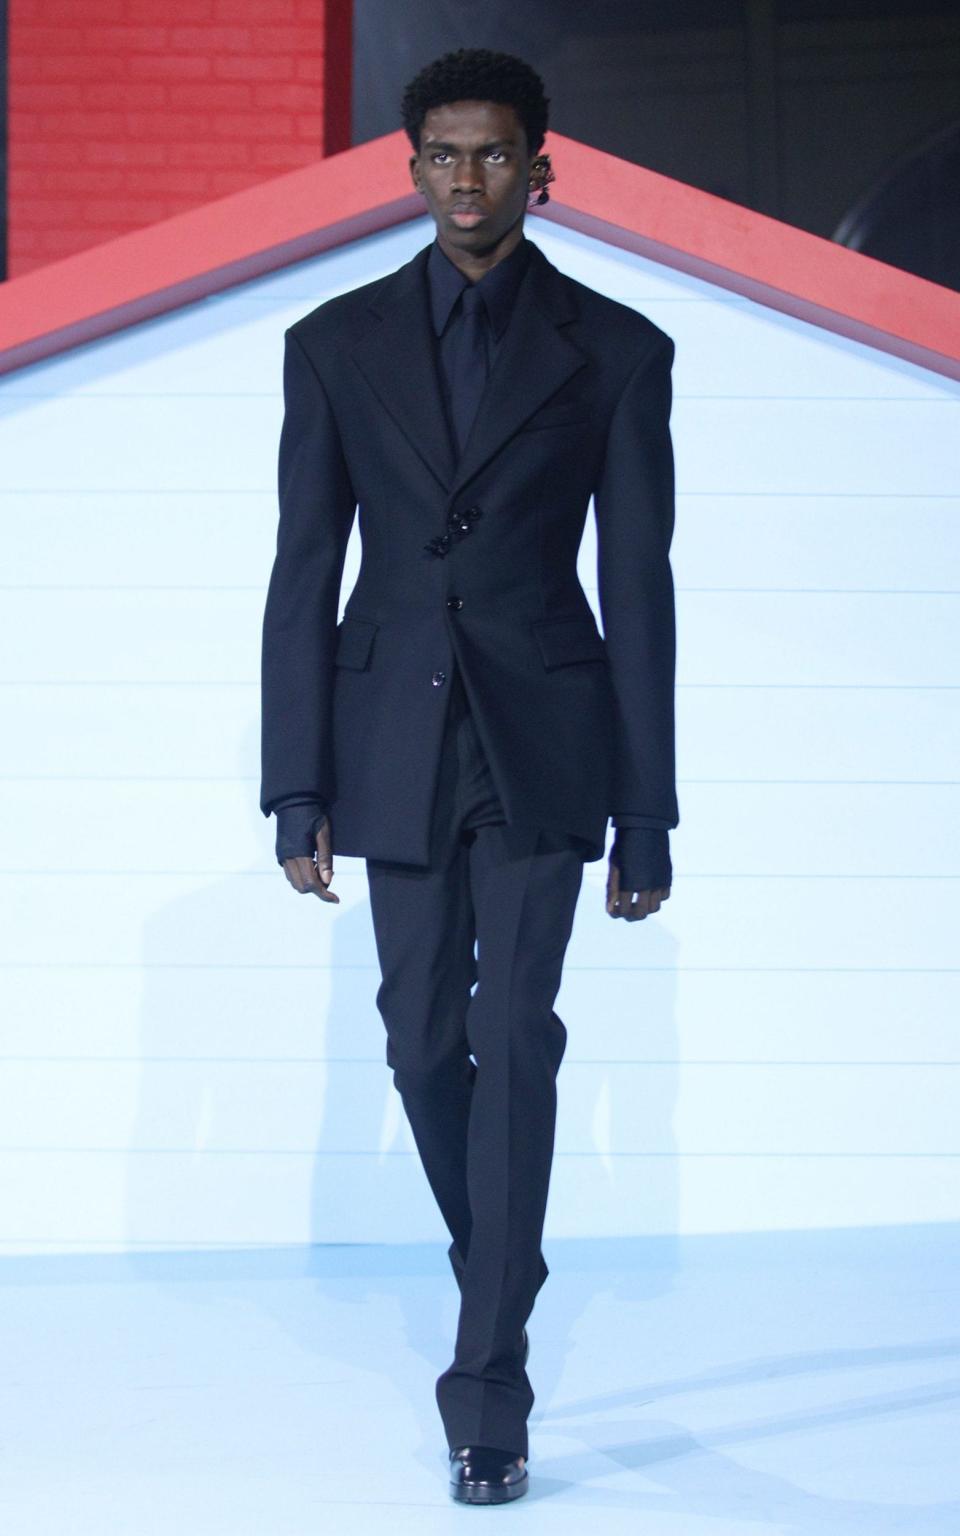 The late Virgil Abloh's final collection for Louis Vuitton featured impeccably sharp suits in lean silhouettes - Mohammed Badra/EPA-EFE/Shutterstock